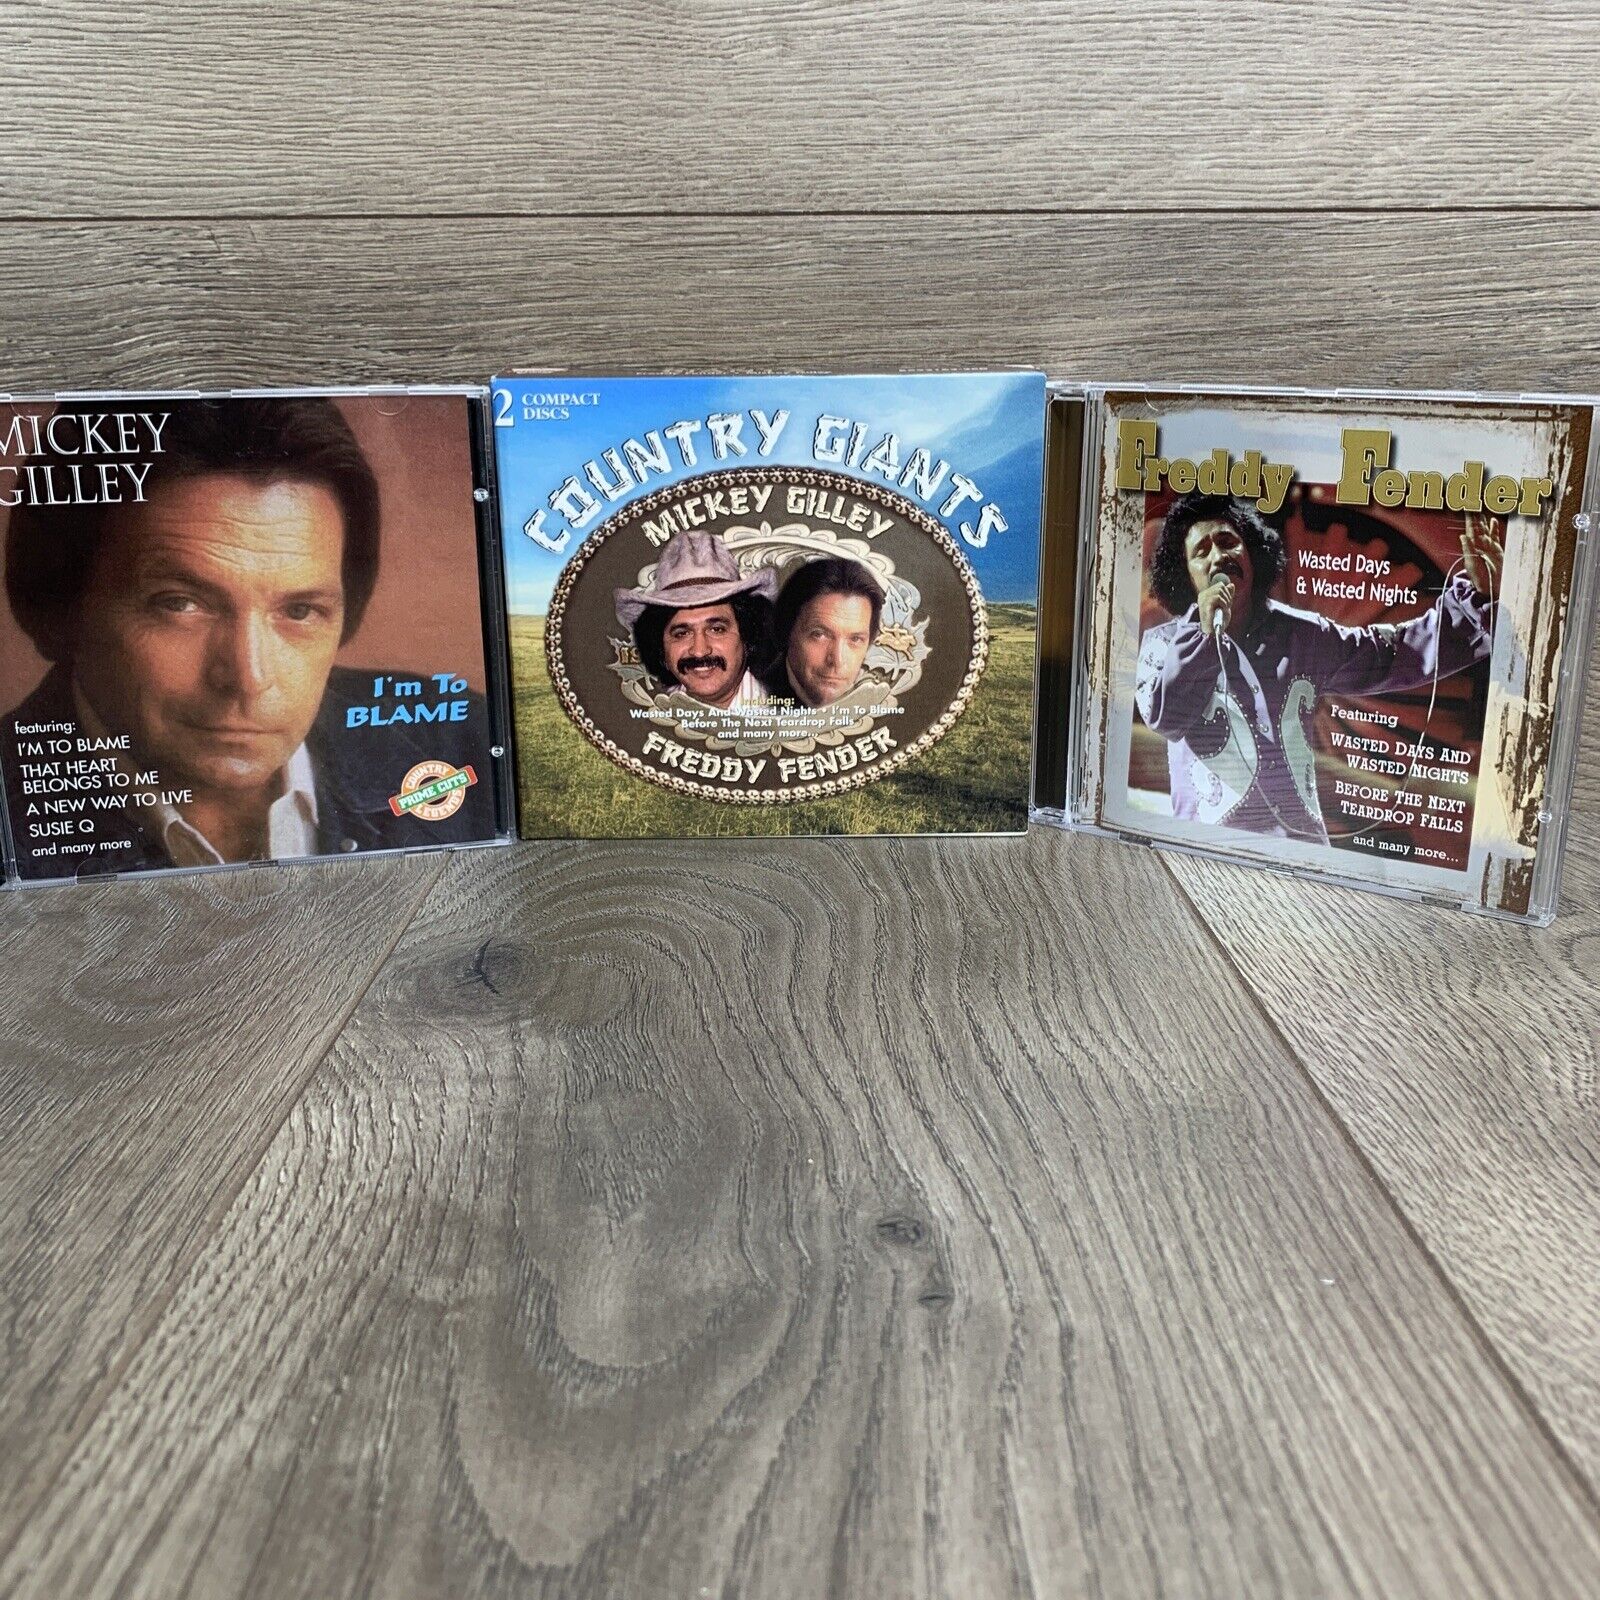 Country Giants - Mickey Gilley Freddy Fender Country 2 Discs CD Music Box Set